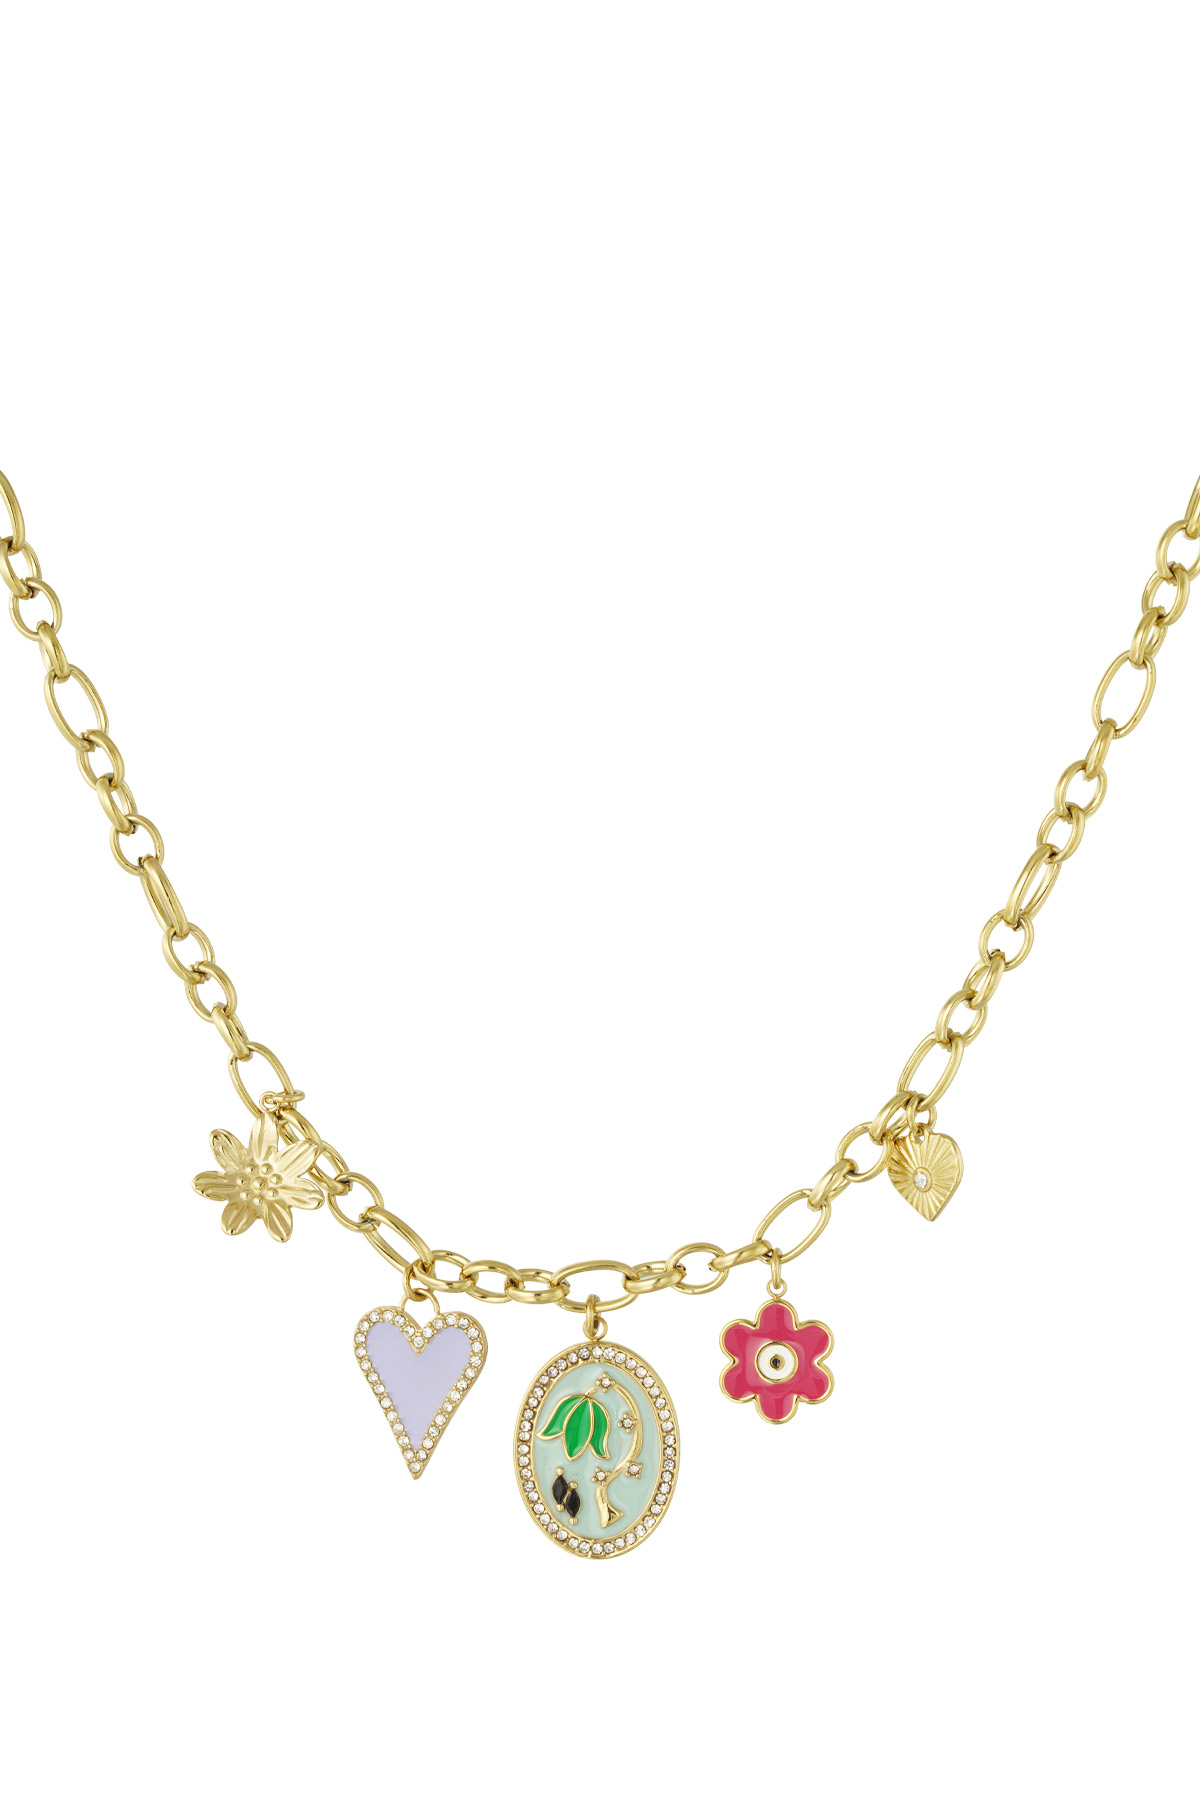 Roses road charm necklace - gold